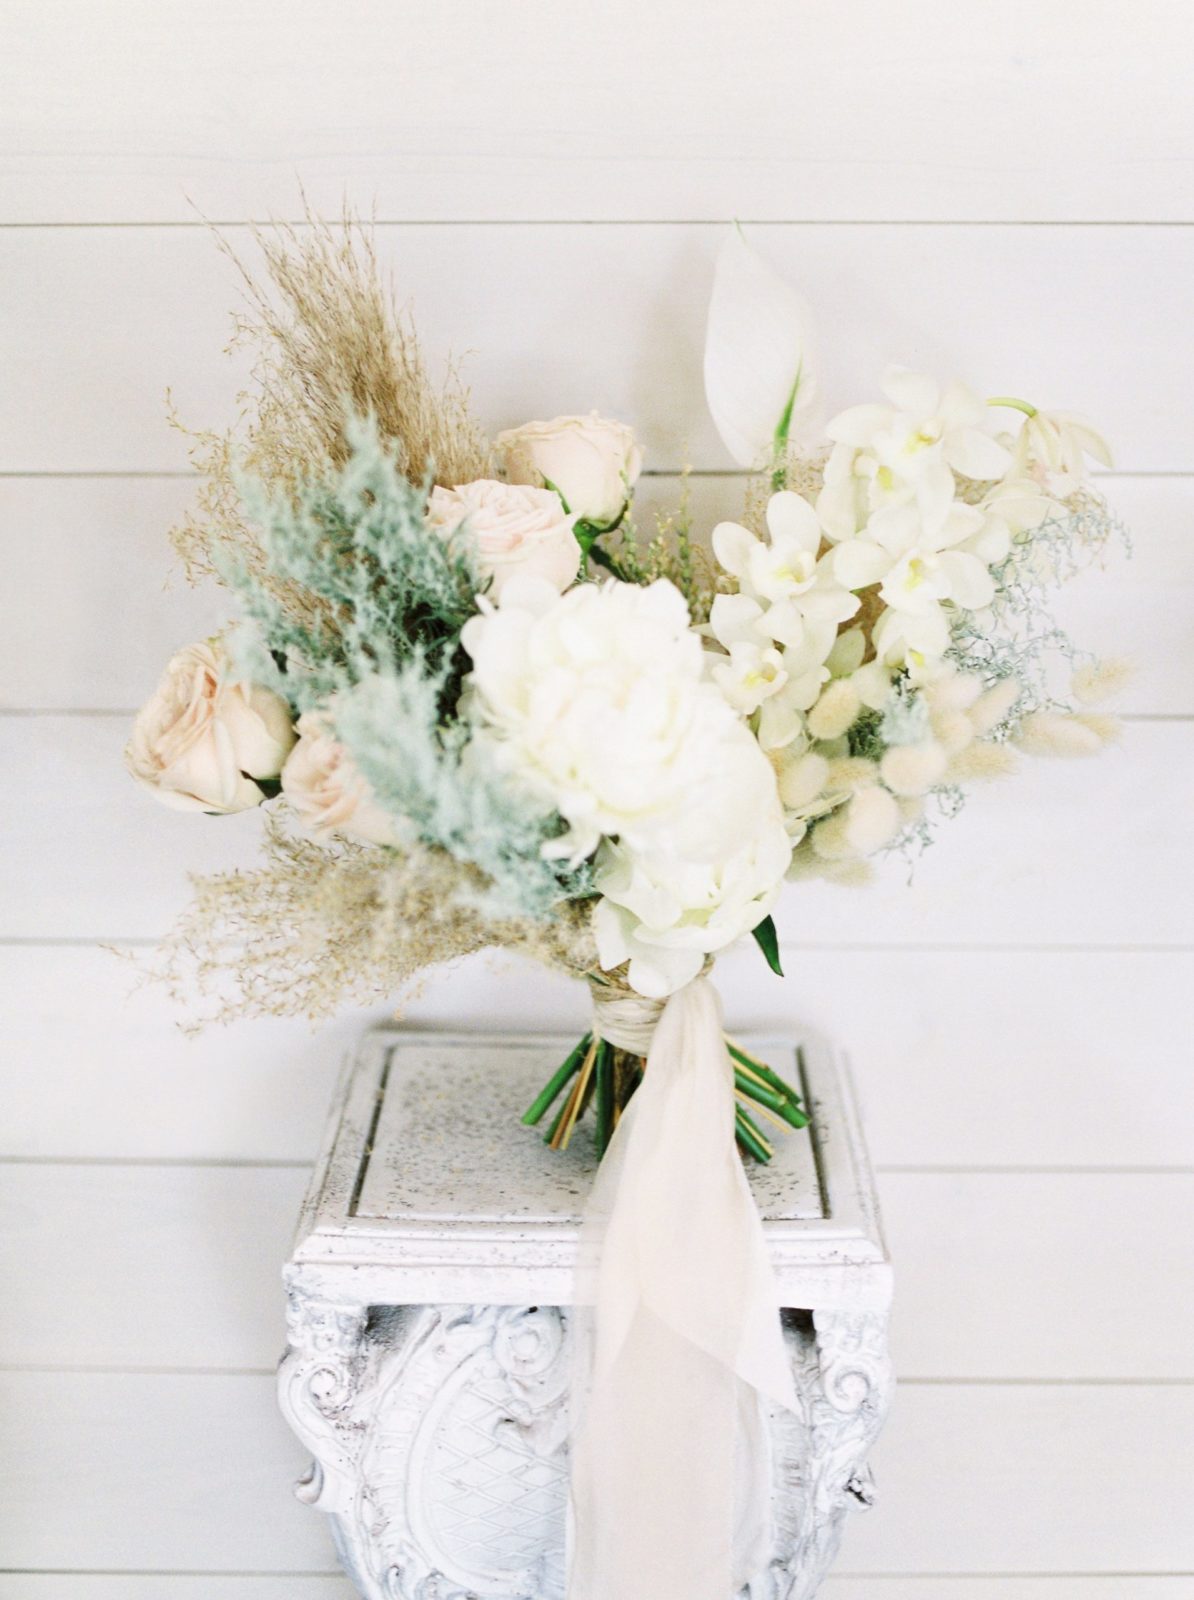 Minim Designs floral bouquet with white and blush hues